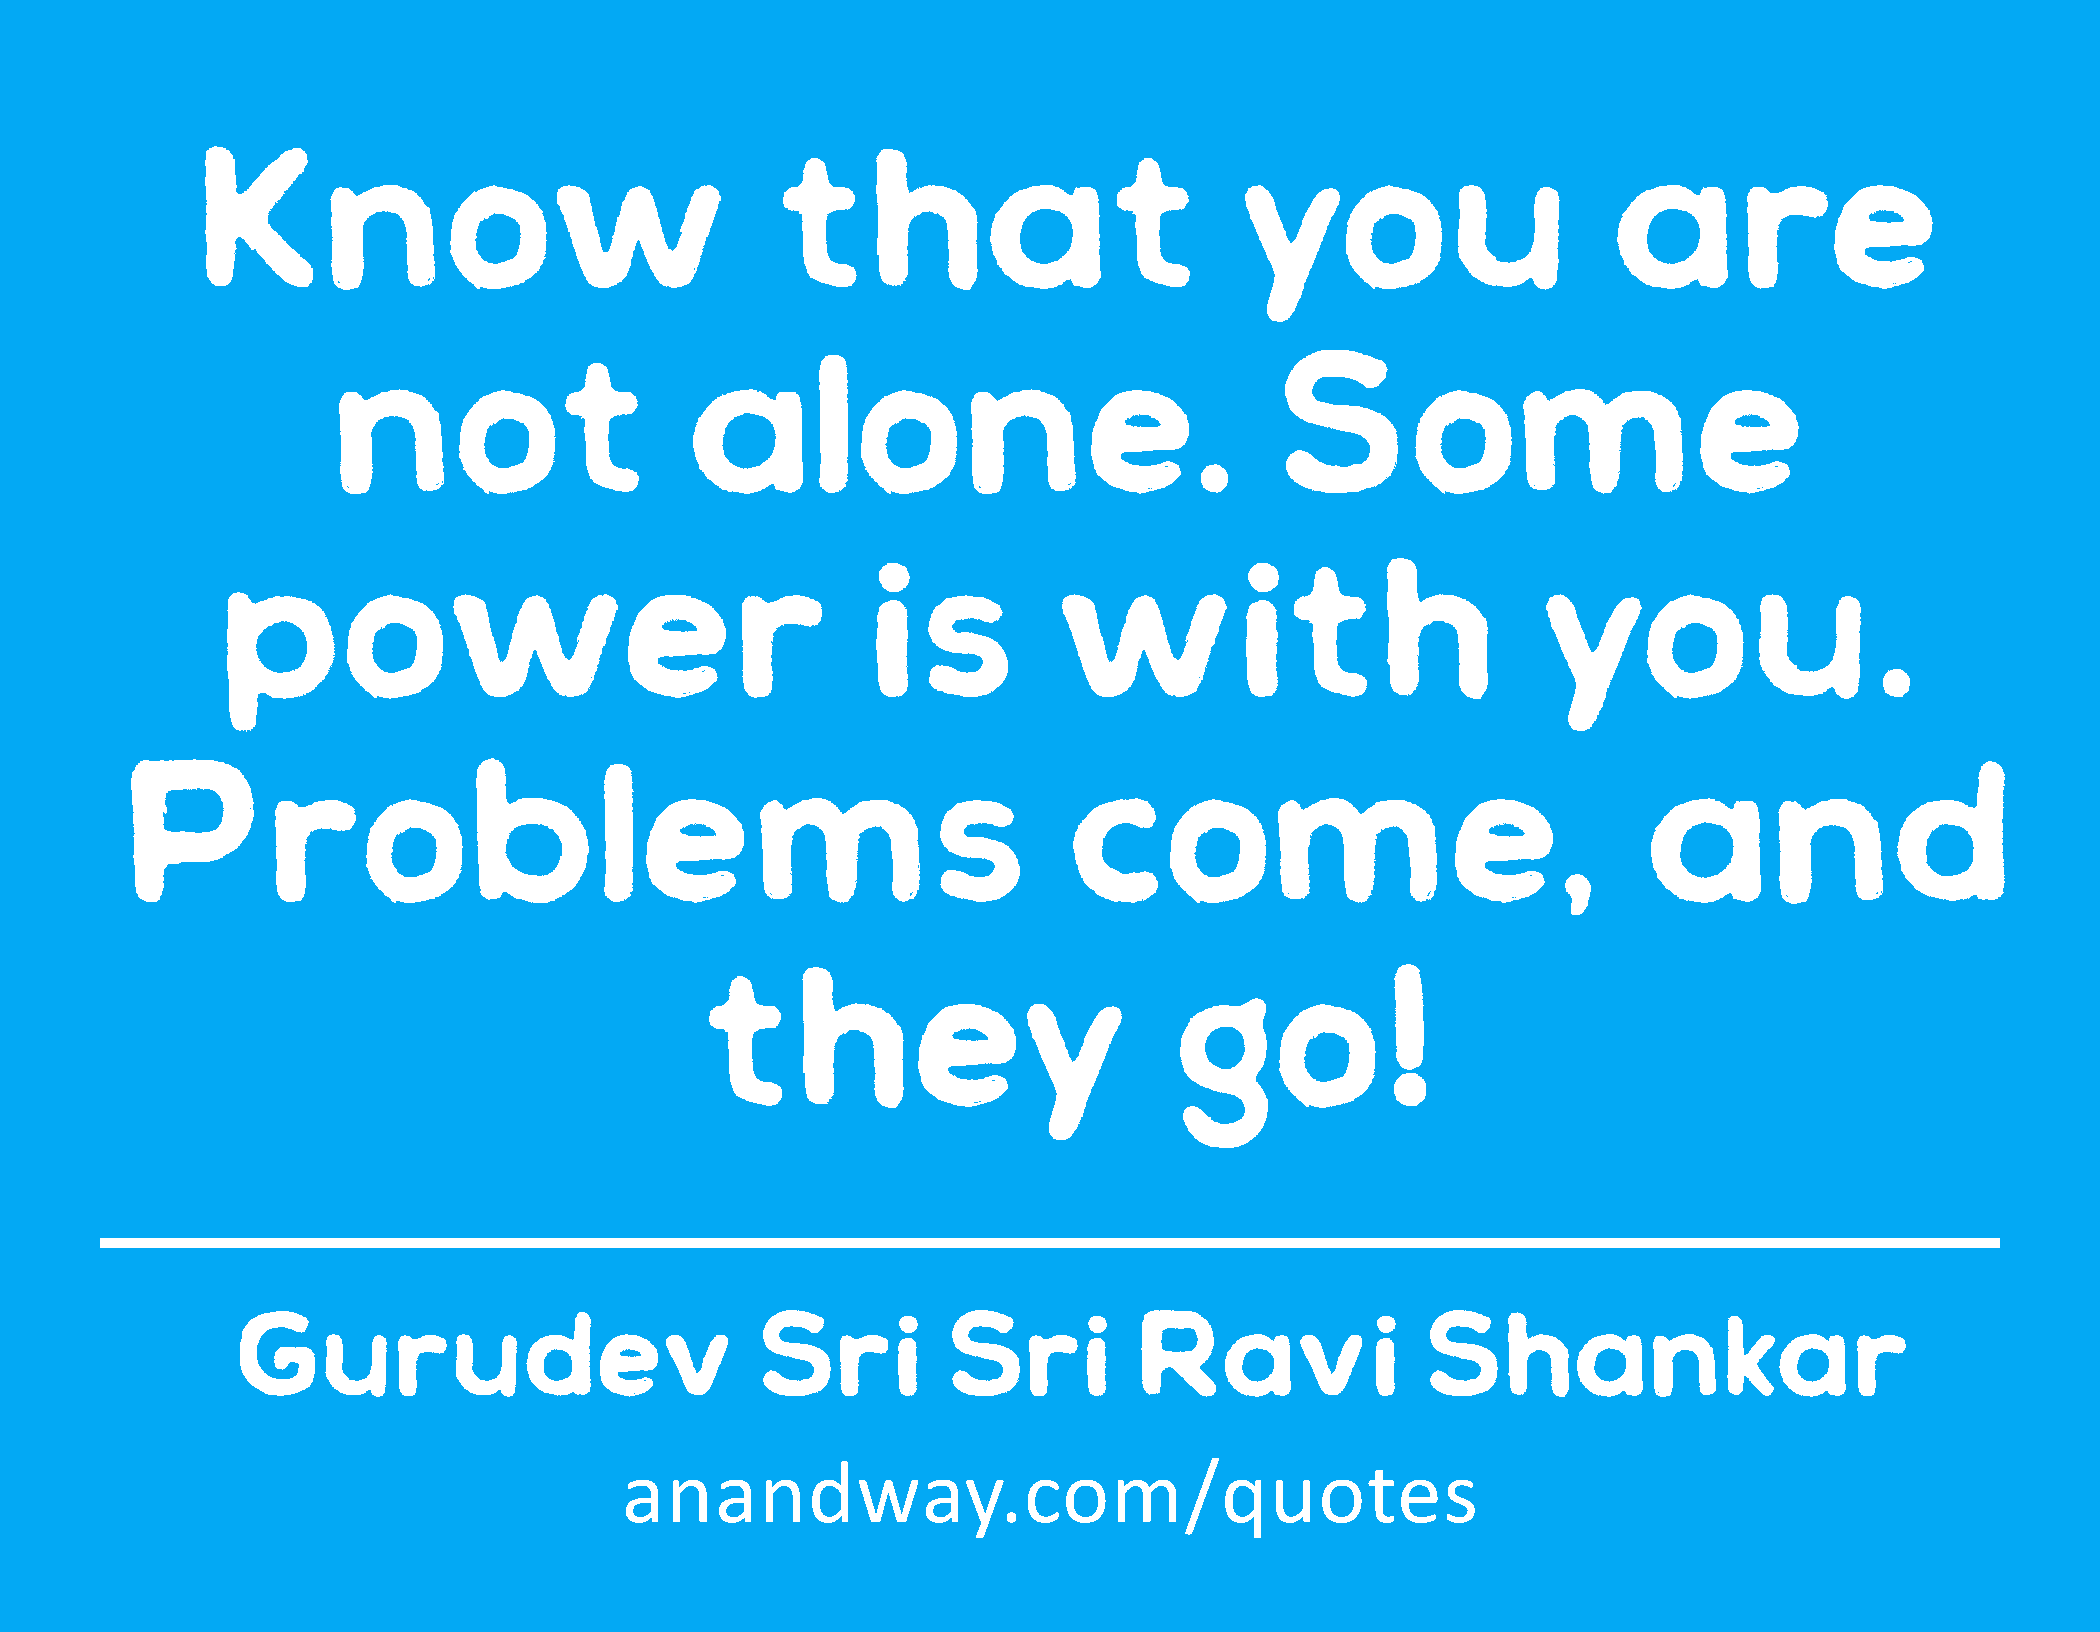 Know that you are not alone. Some power is with you. Problems come, and they go!
 -Gurudev Sri Sri Ravi Shankar